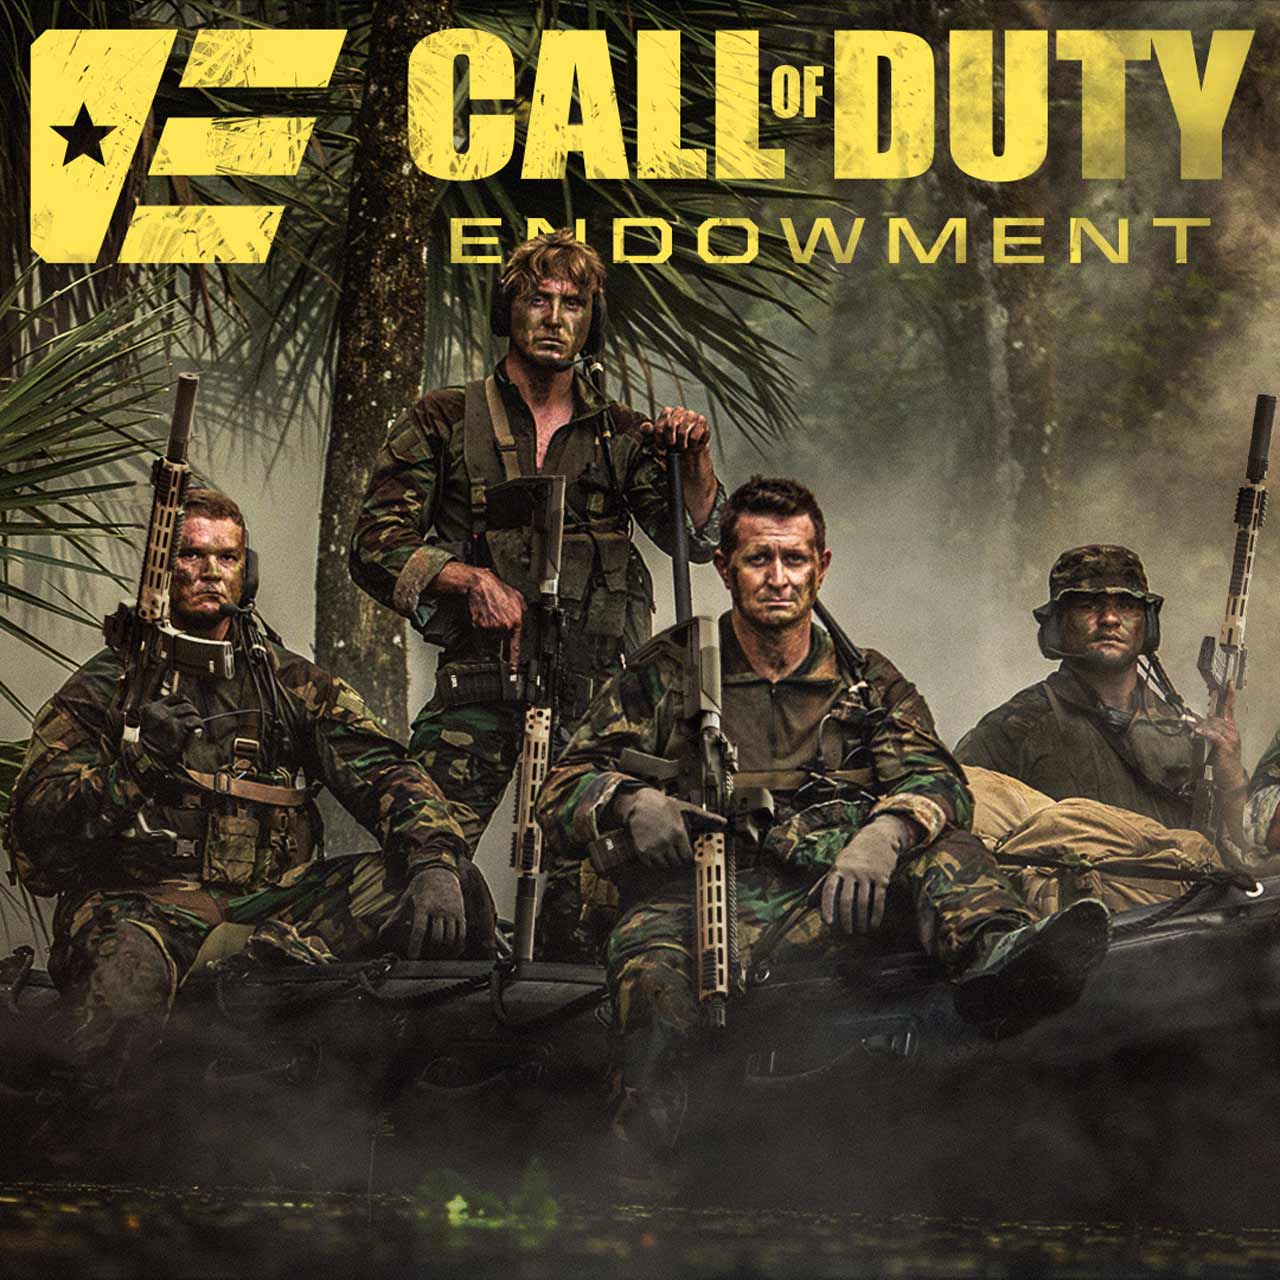 Call of Duty Endowment C.O.D.E. Protector Pack 2 - خرید پک Call of Duty Endowment Protector Pack برای برای بازی Call of Duty MW2 | Warzone 2